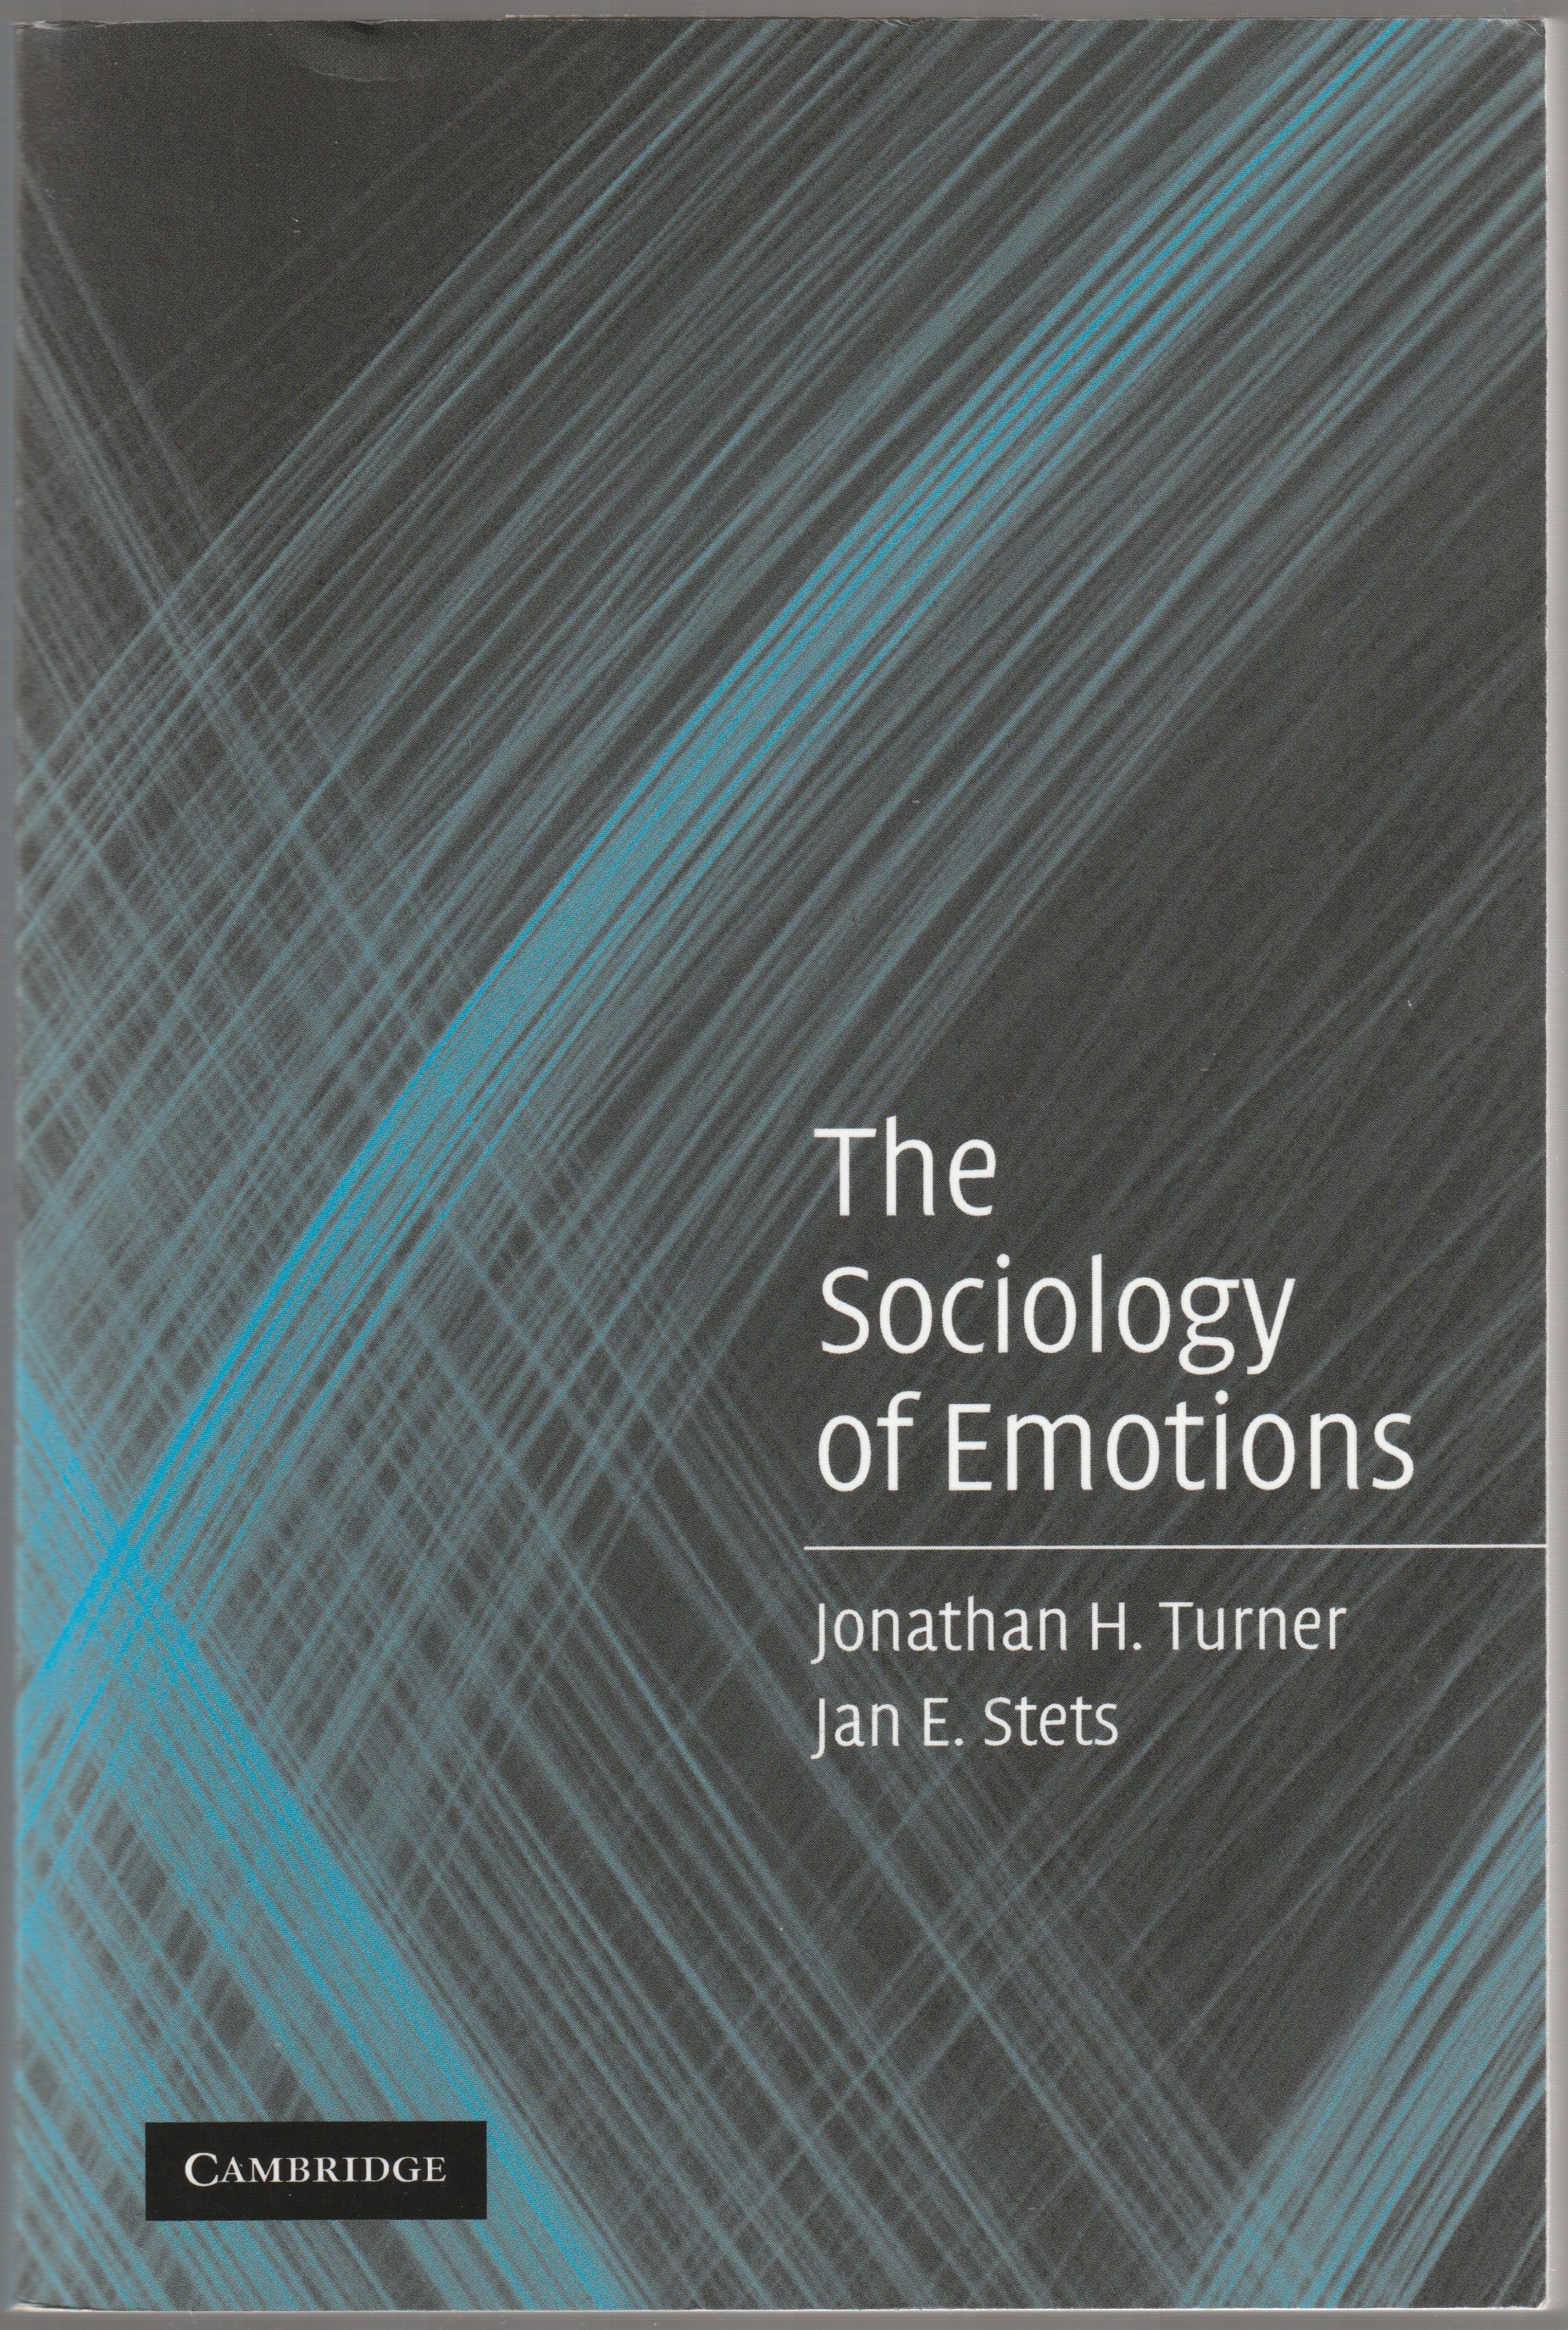 The sociology of emotions.